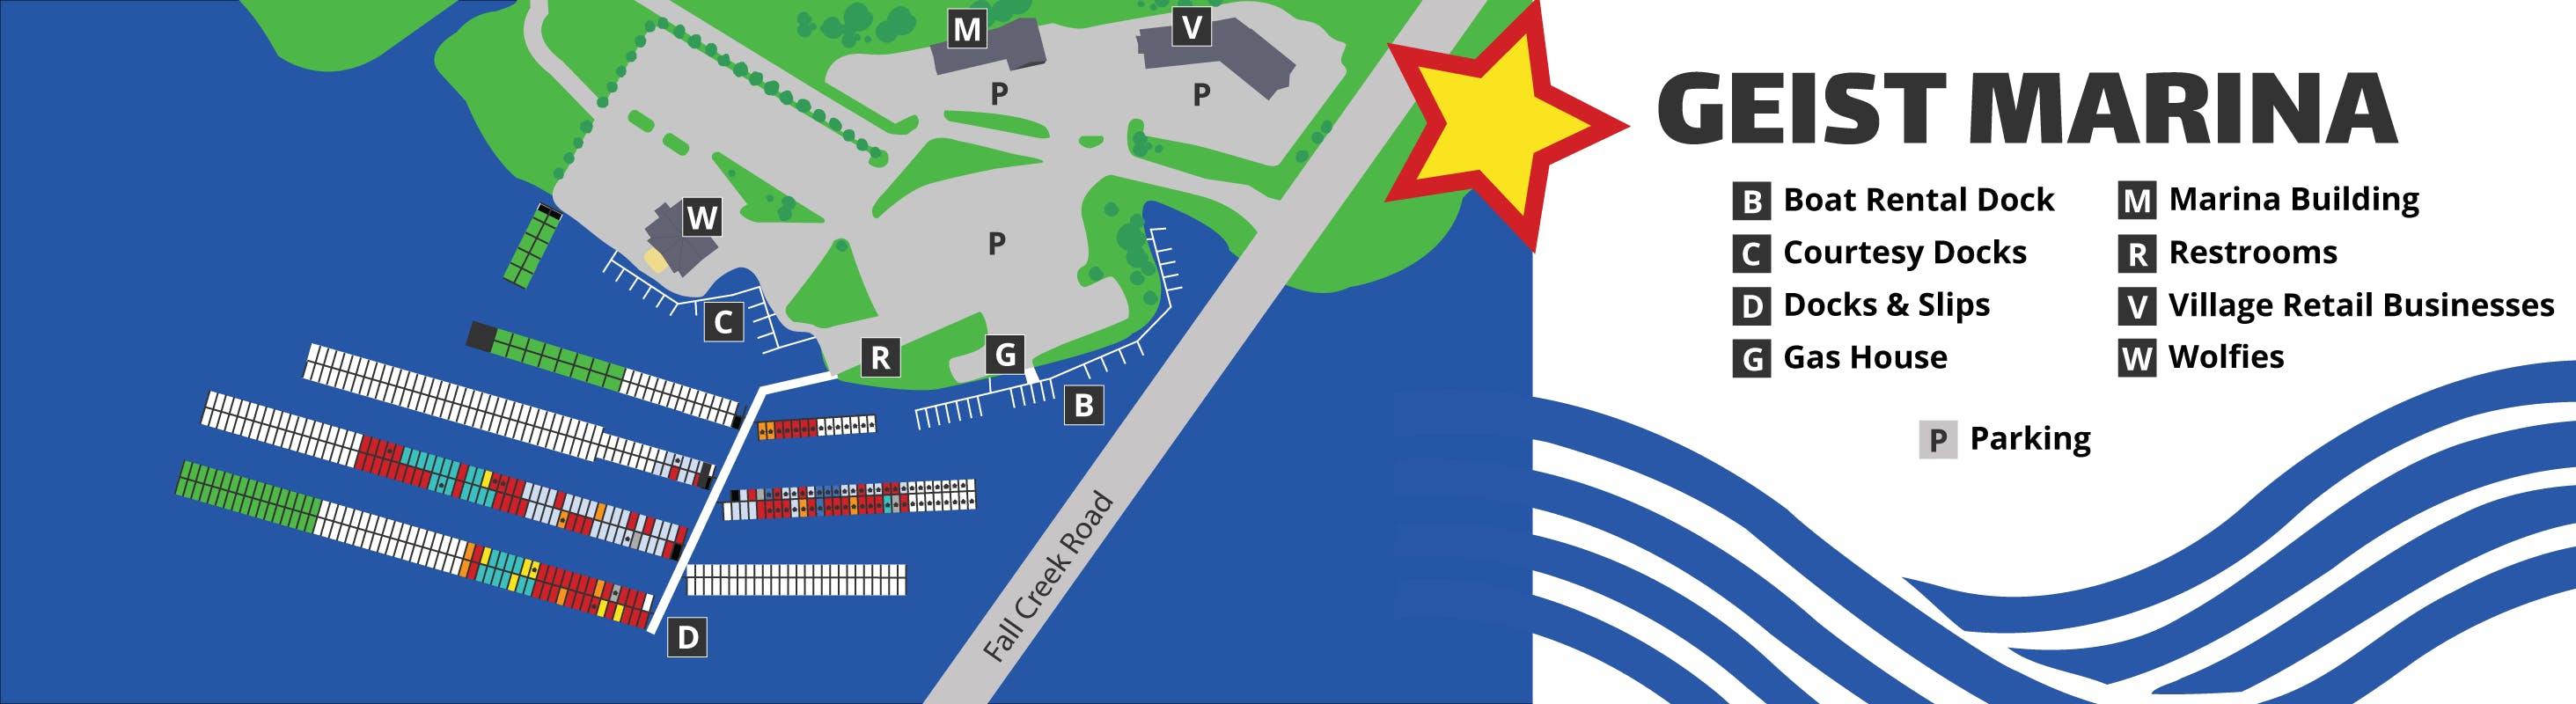 <p>Shows orientation and layout of Geist Marina property</p>
